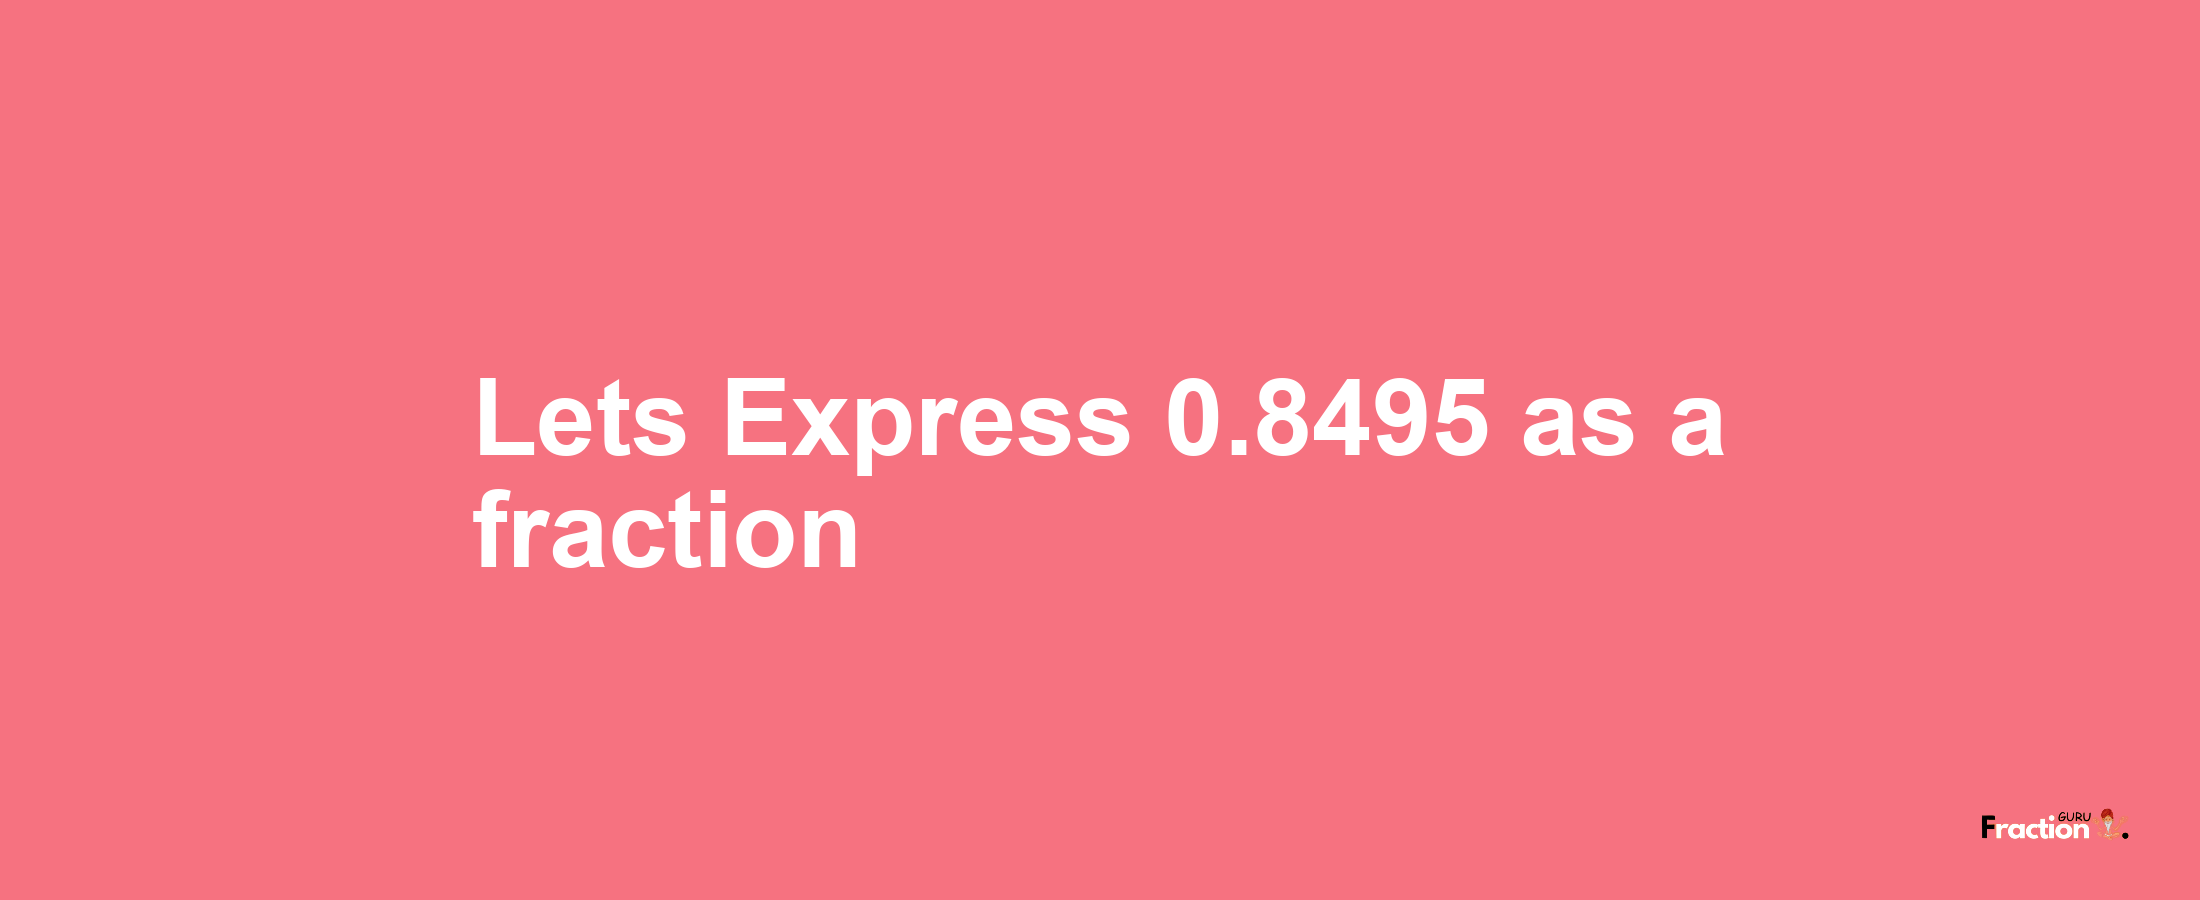 Lets Express 0.8495 as afraction